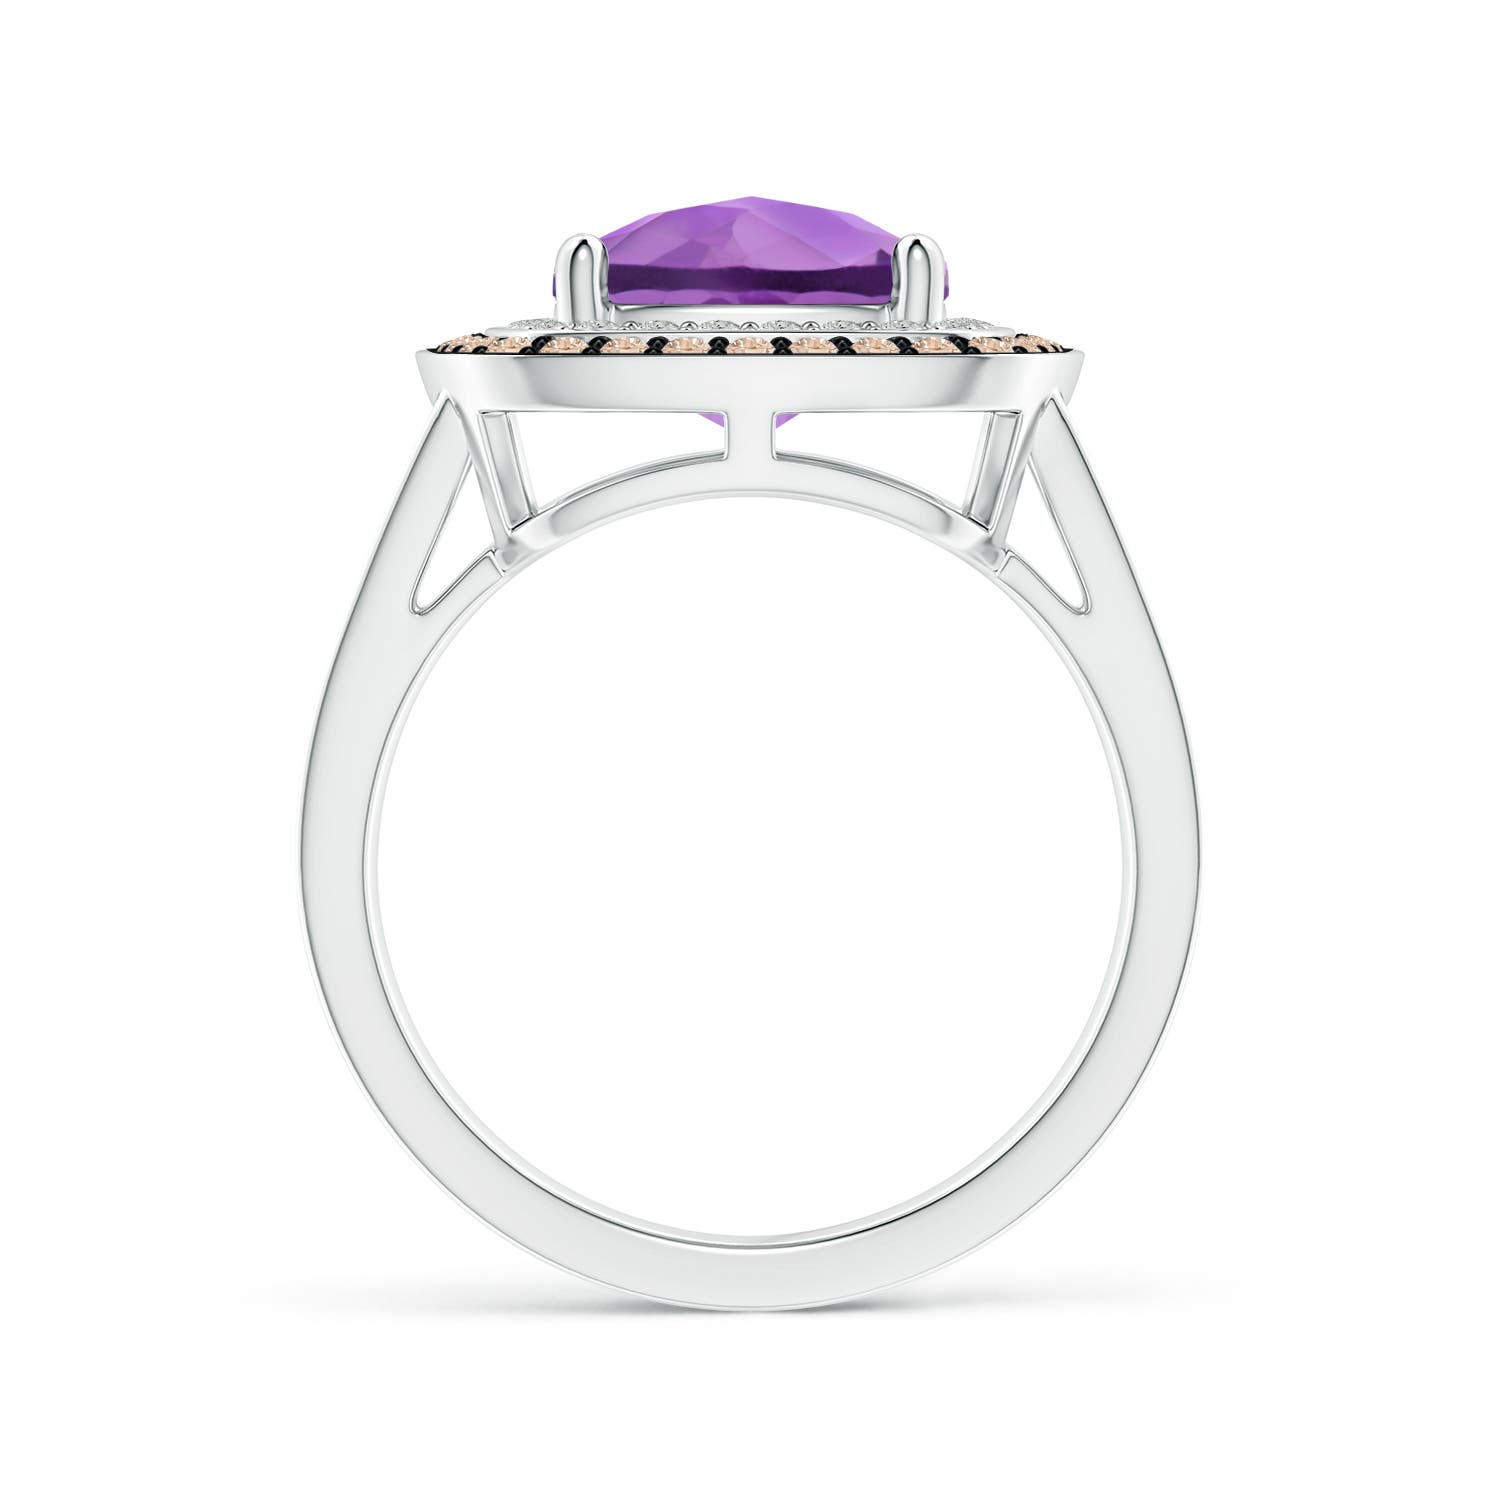 A - Amethyst / 3.7 CT / 14 KT White Gold